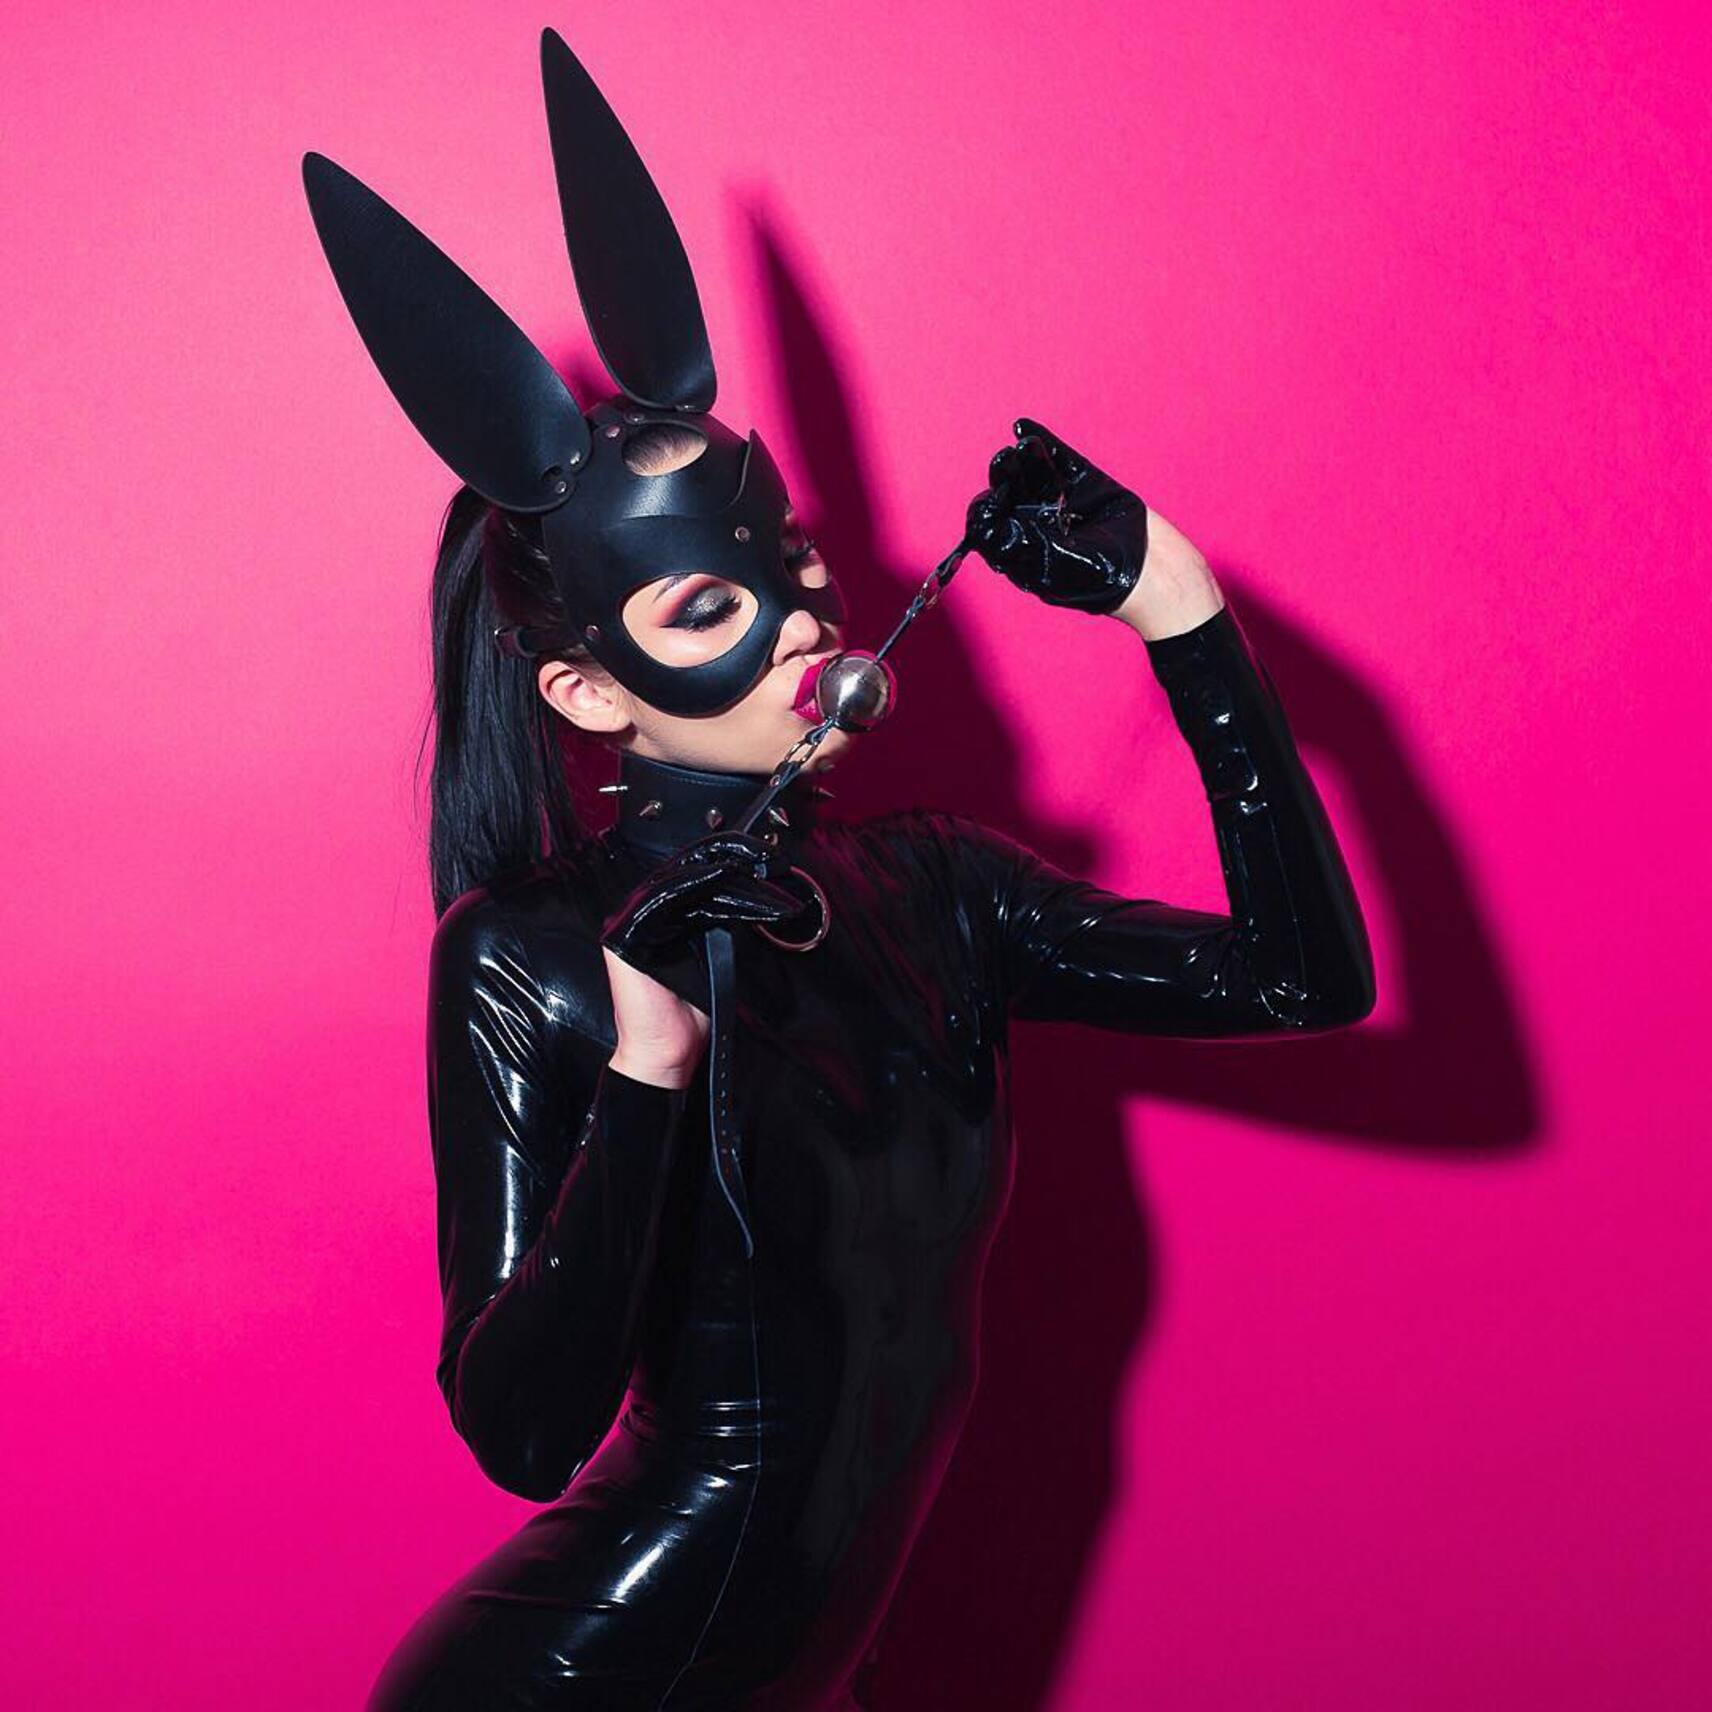 Leather bunny mask black with slits for eyes and clasp at the back